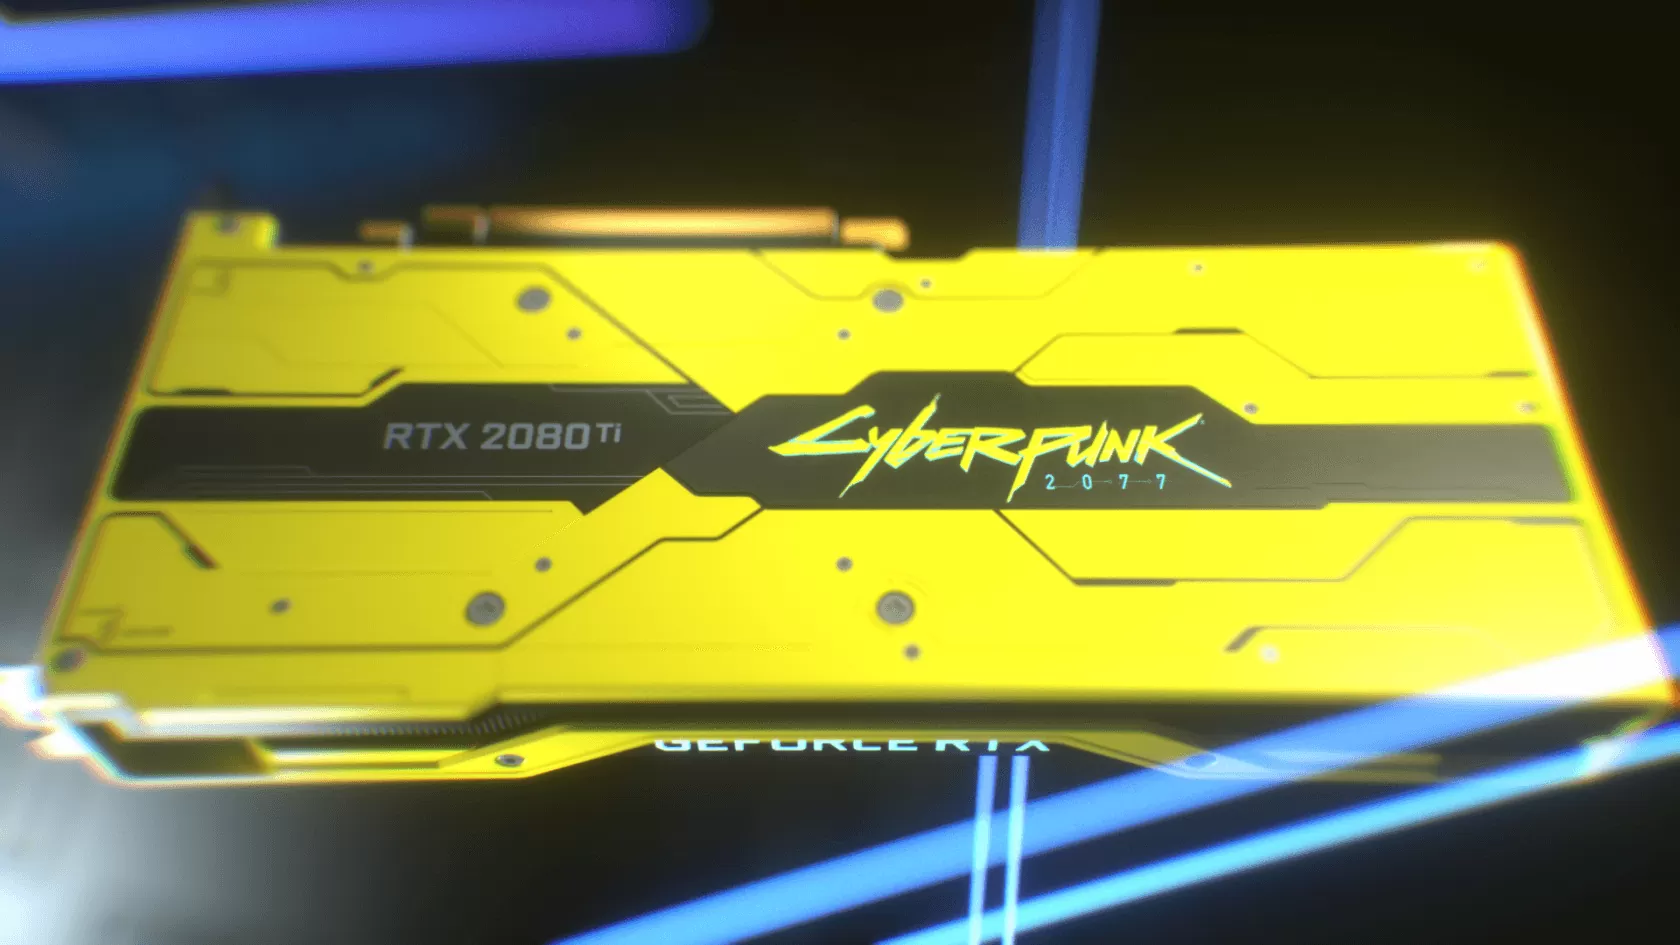 Got $4,200+ spare? You could buy a Cyberpunk 2077 GeForce RTX 2080 Ti on eBay